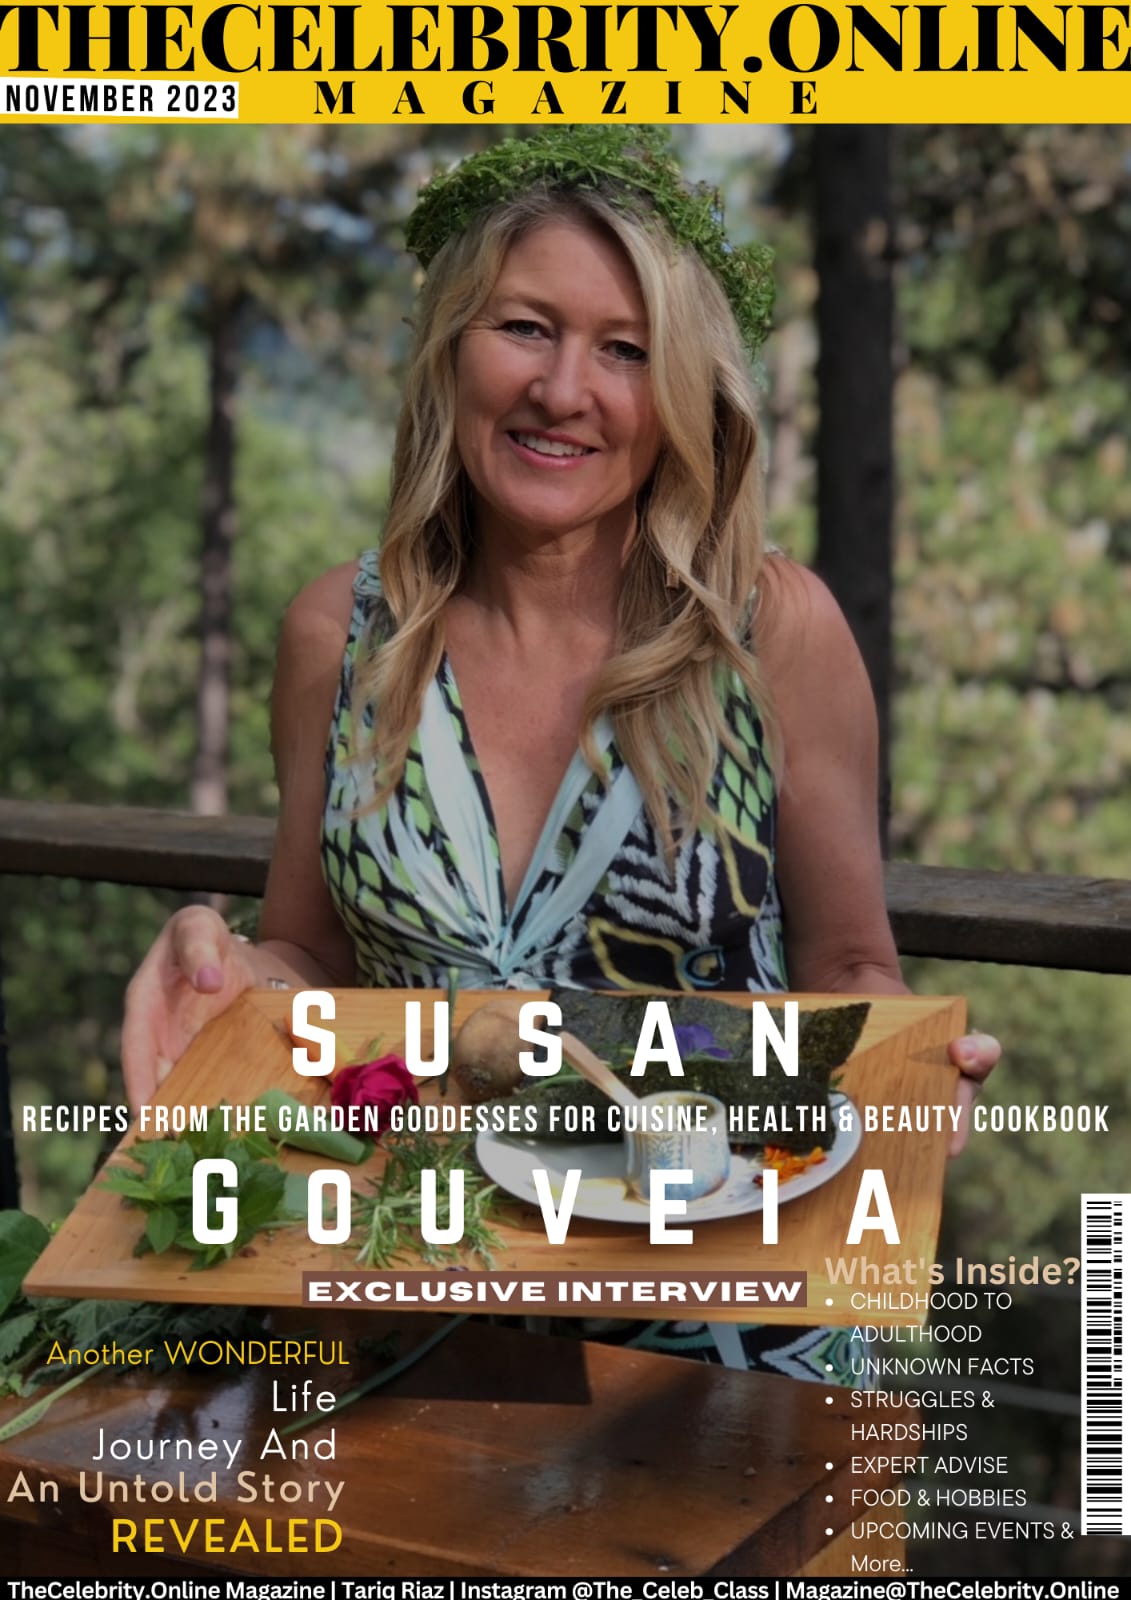 Susan Gouveia: Recipes from the Garden Goddesses for Cuisine, Health & Beauty Cookbook – Exclusive Interview